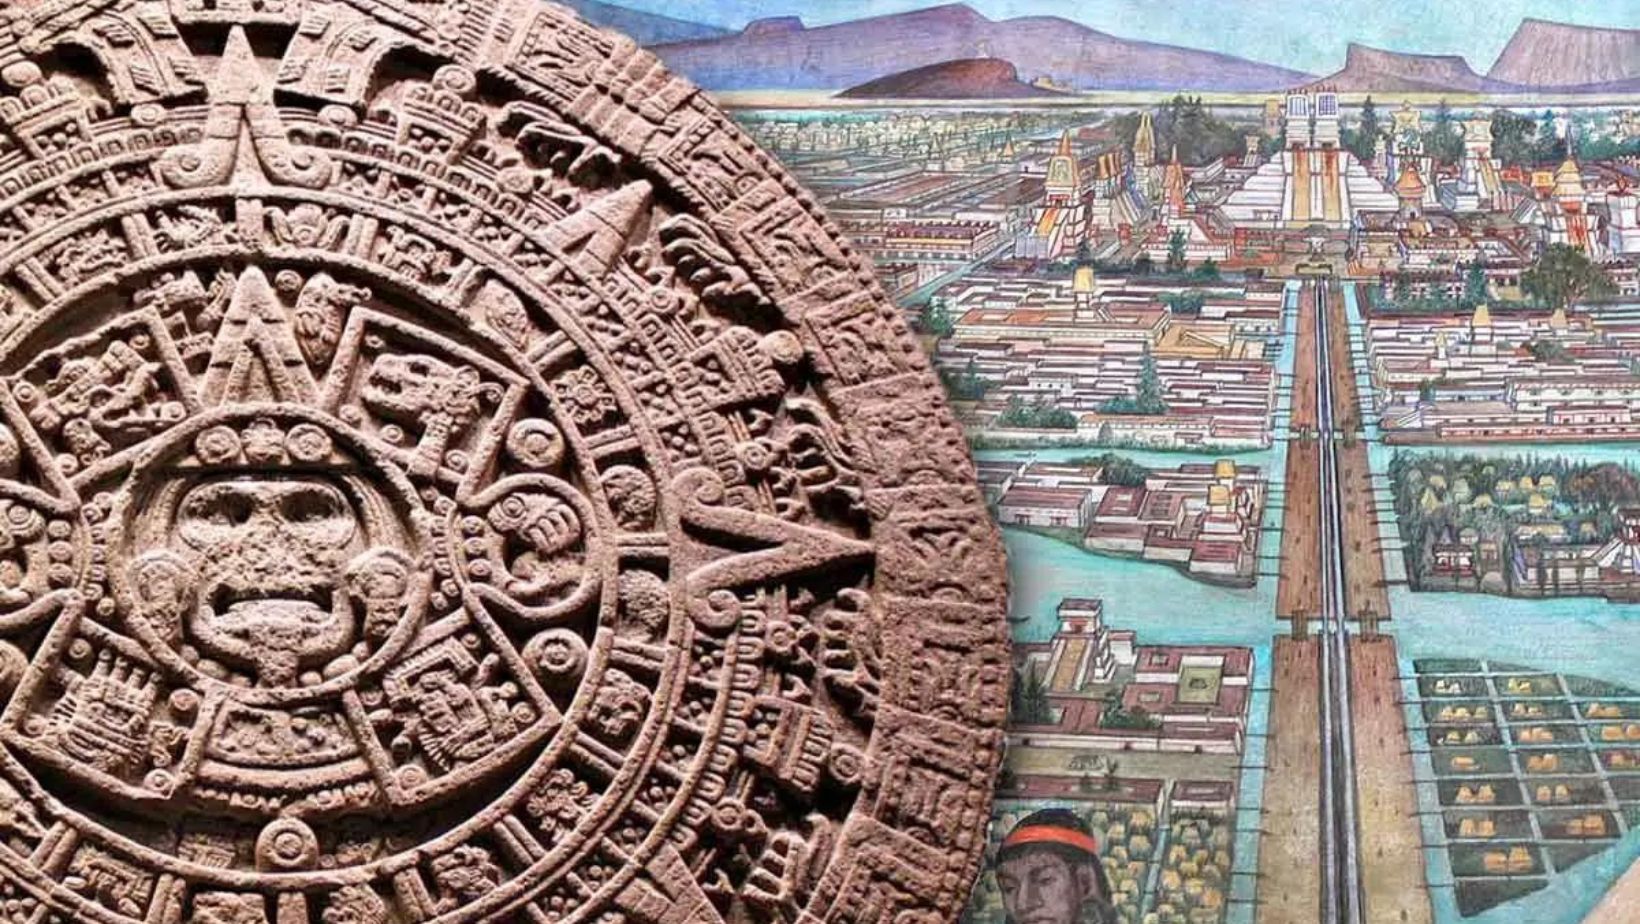 main features of Mayan art and sculpture